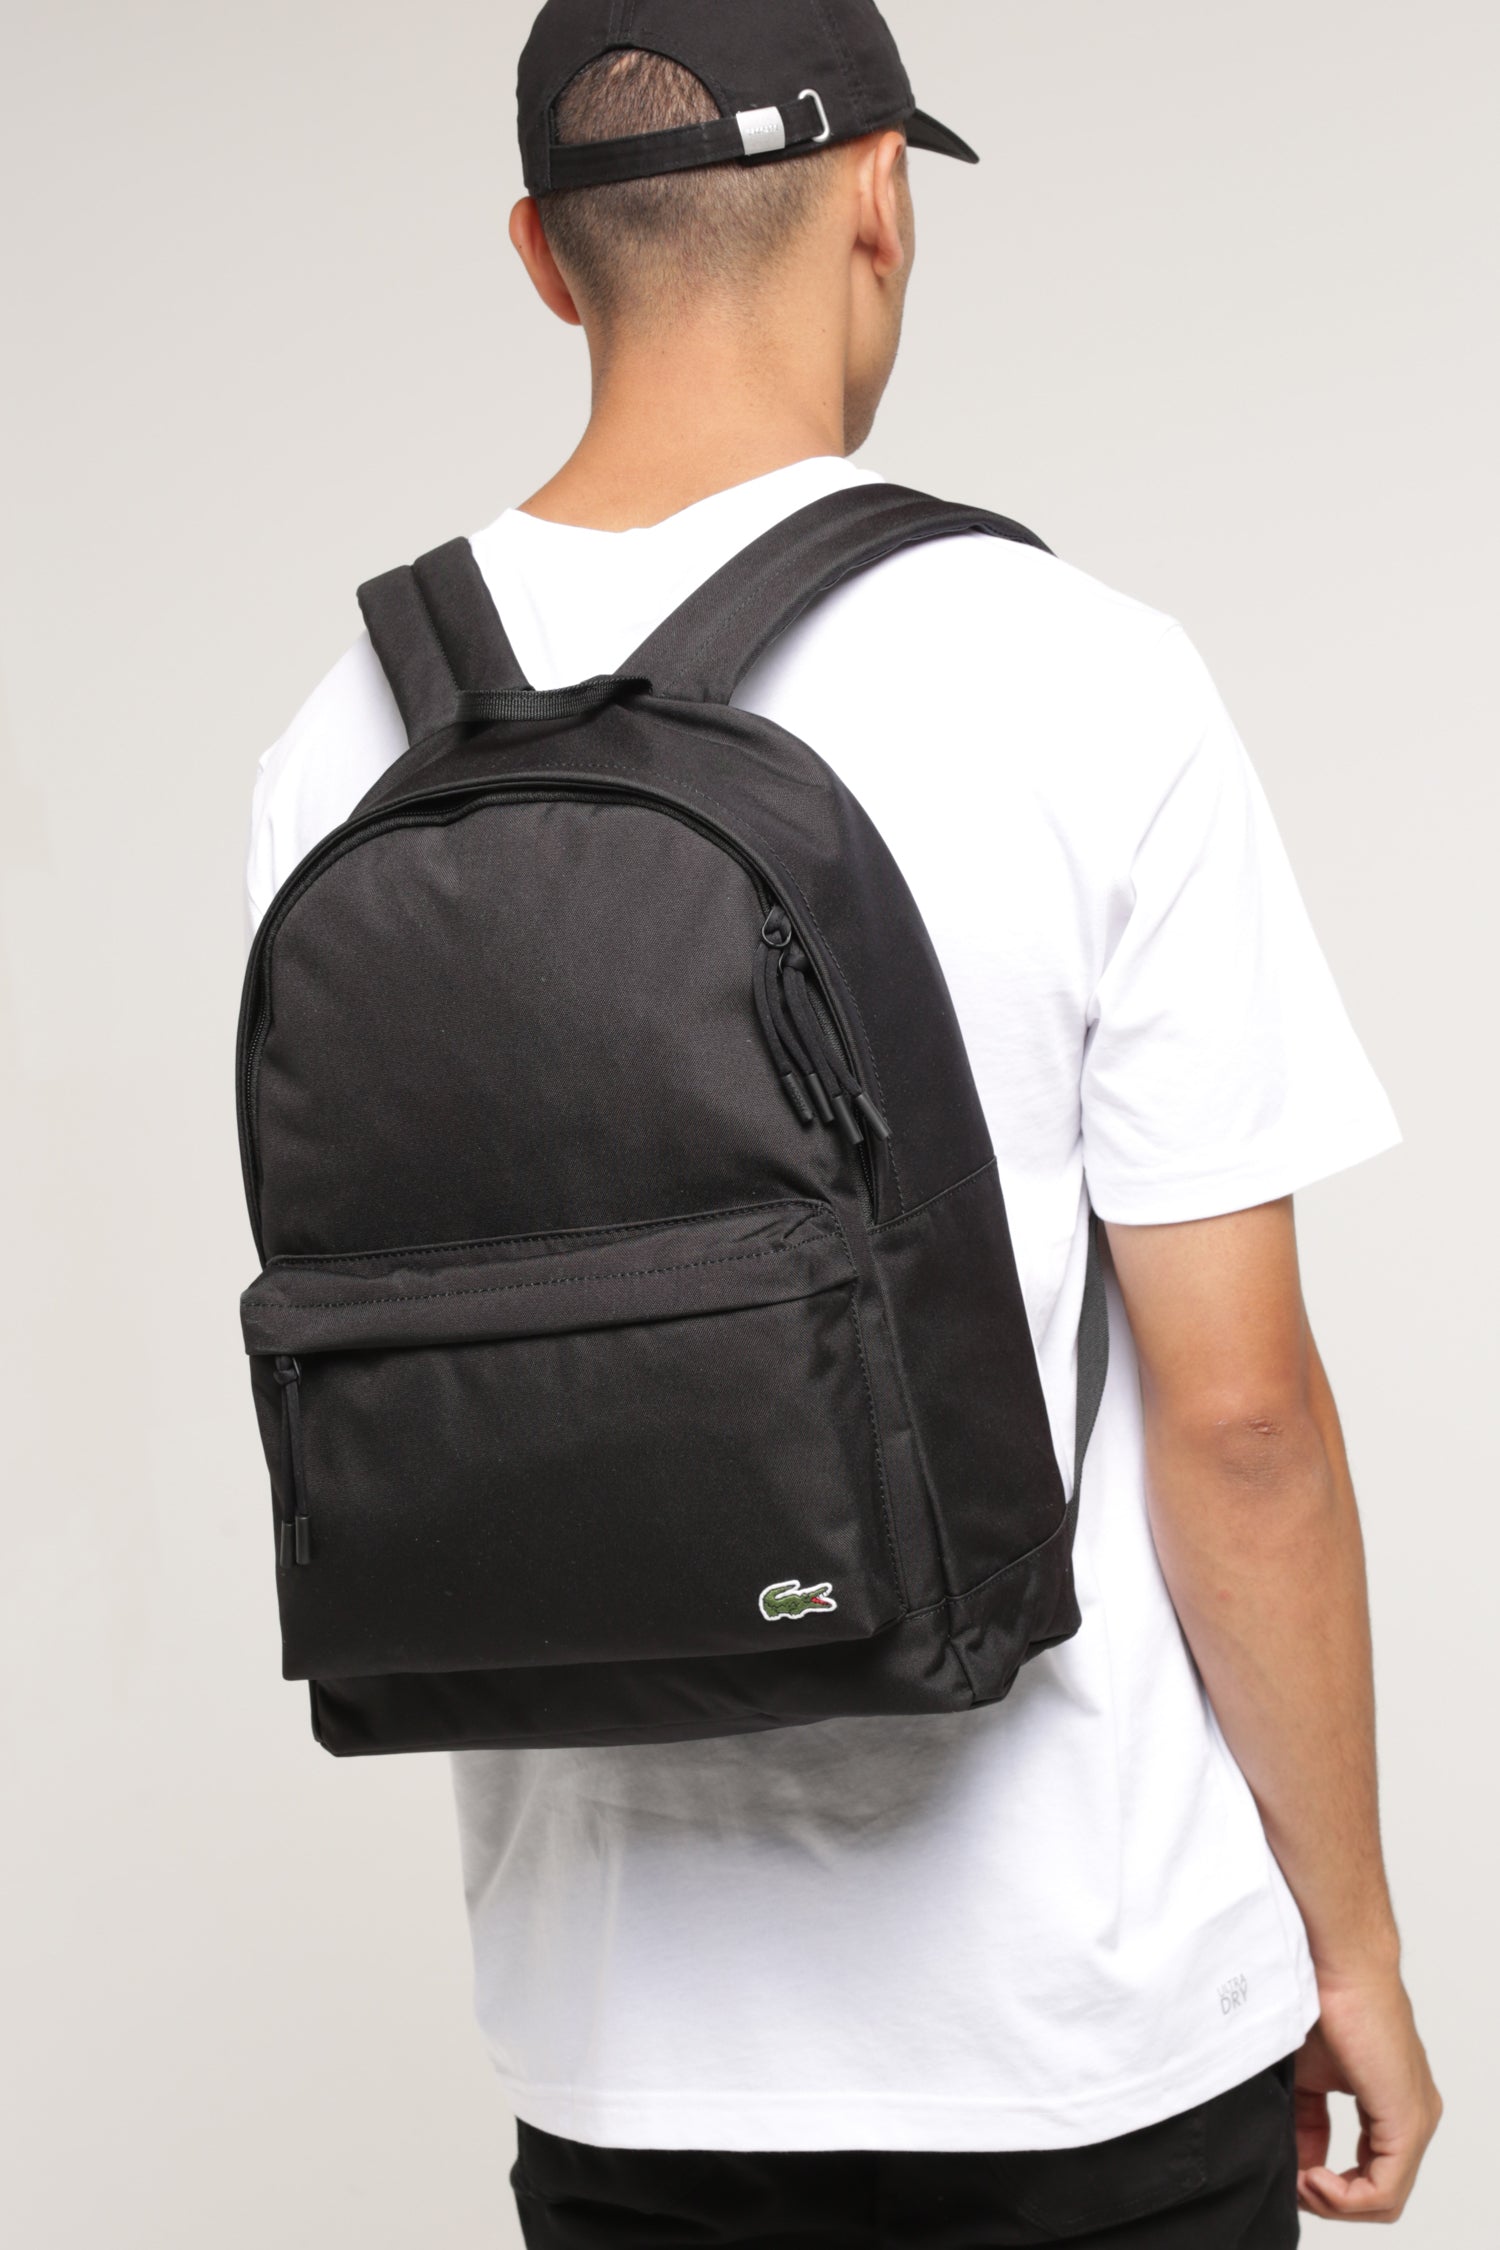 lacoste tennis backpack